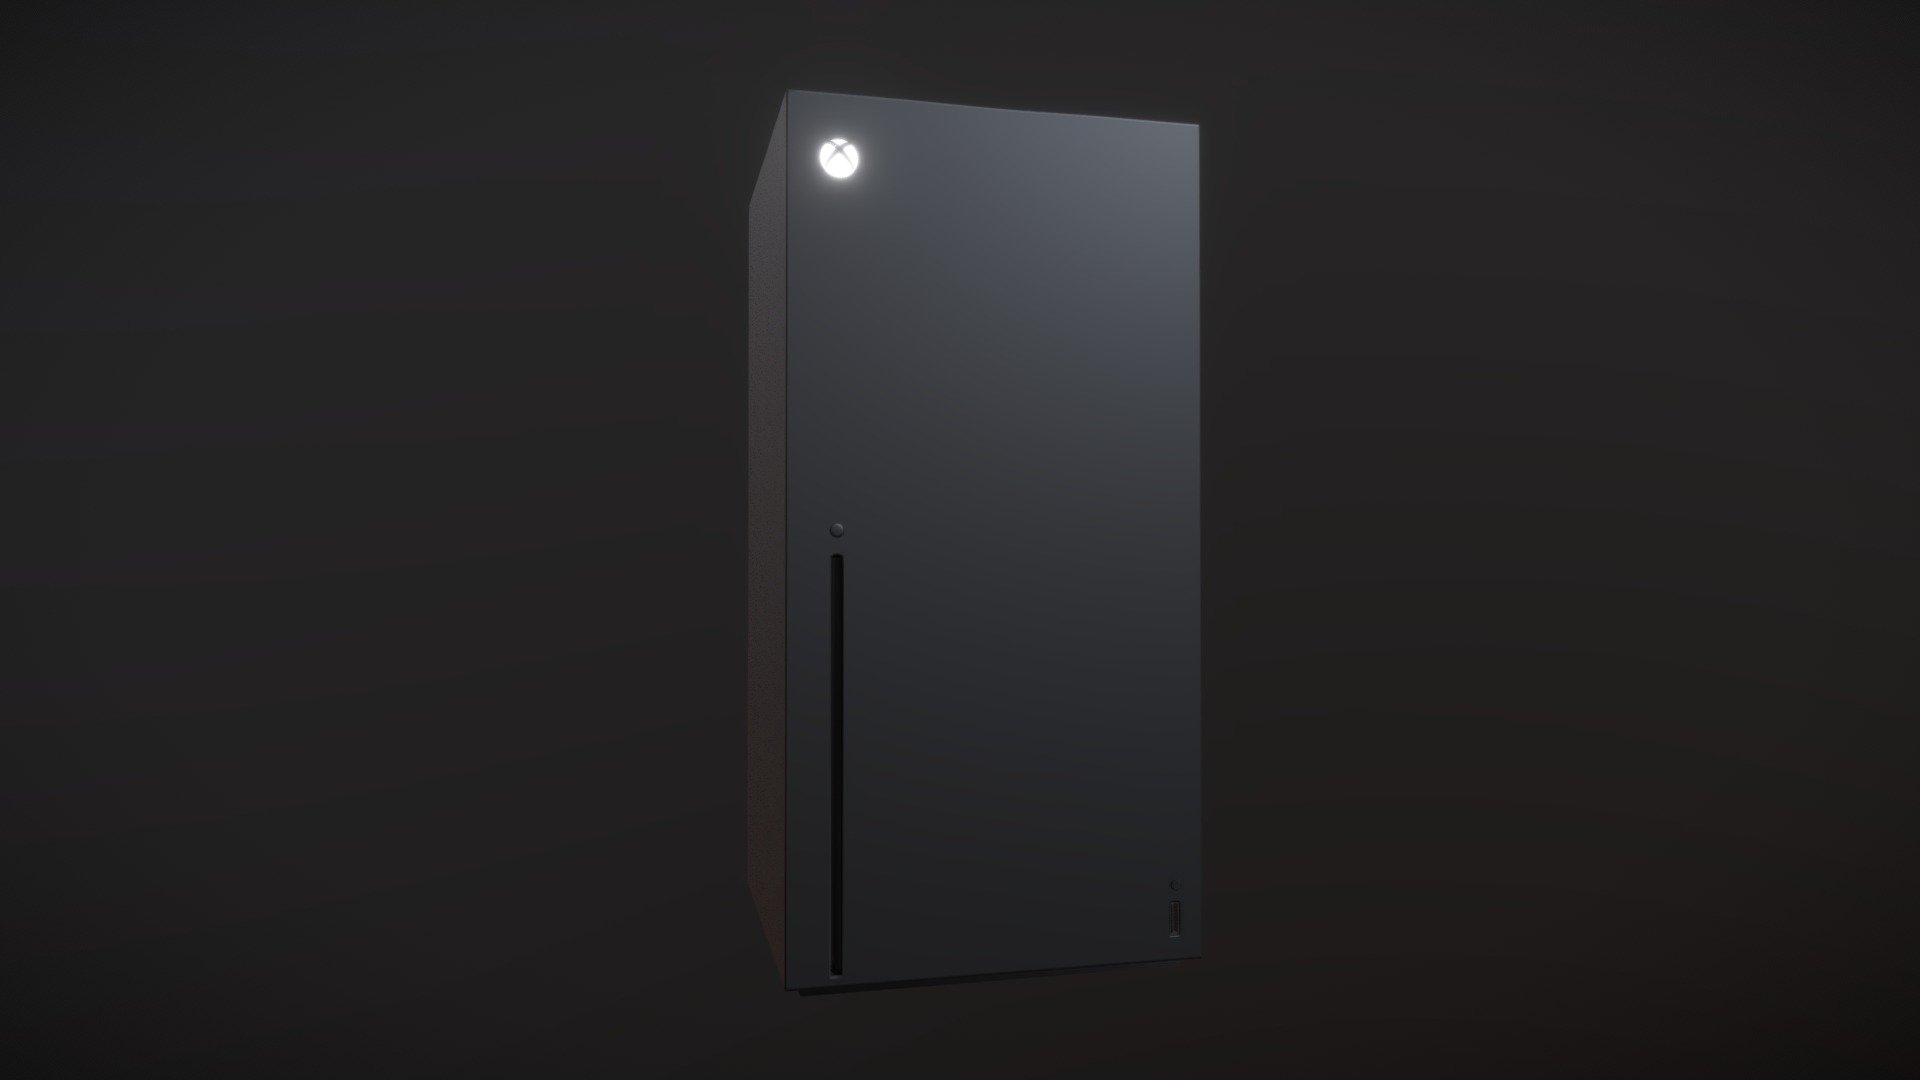 My quick mock up of the newly announced Xbox Series X as part of product advertising practice

All rights obviously go to Microsoft - Xbox Series X console - Download Free 3D model by jordanger88 3d model